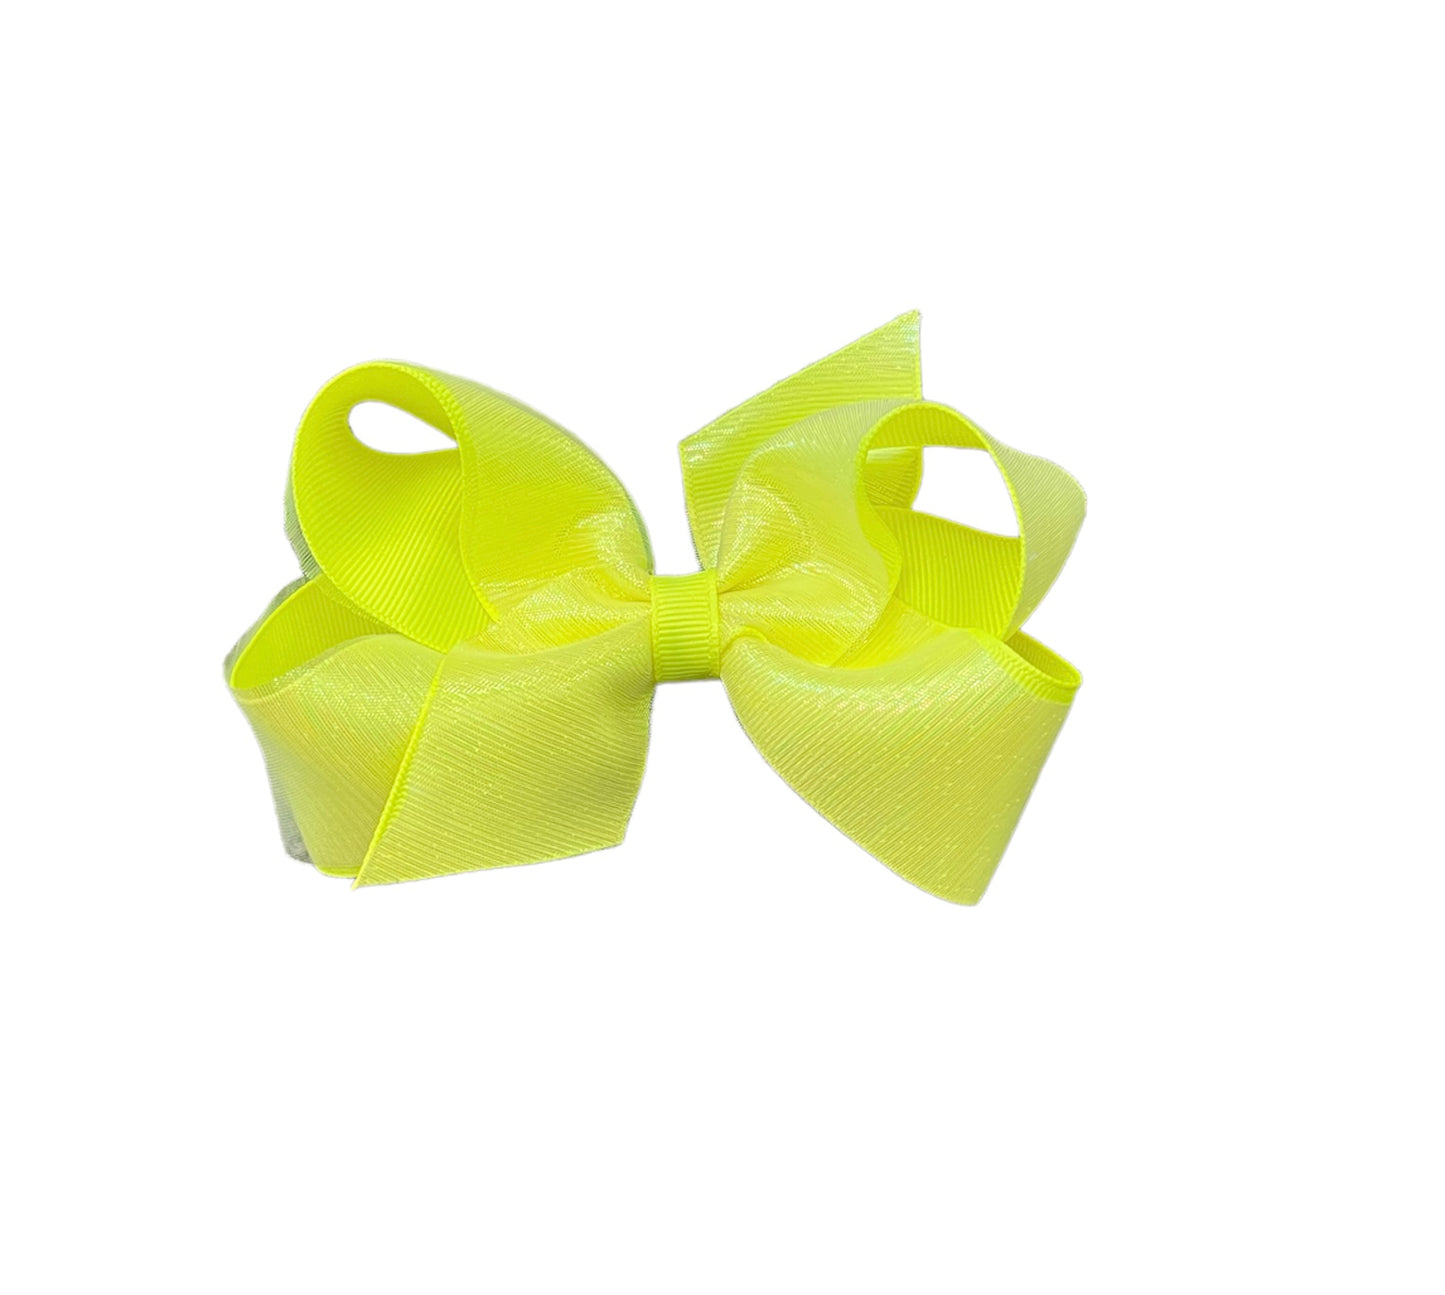 Wee Ones Ansi Yellow Overlay Grosgrain Bow